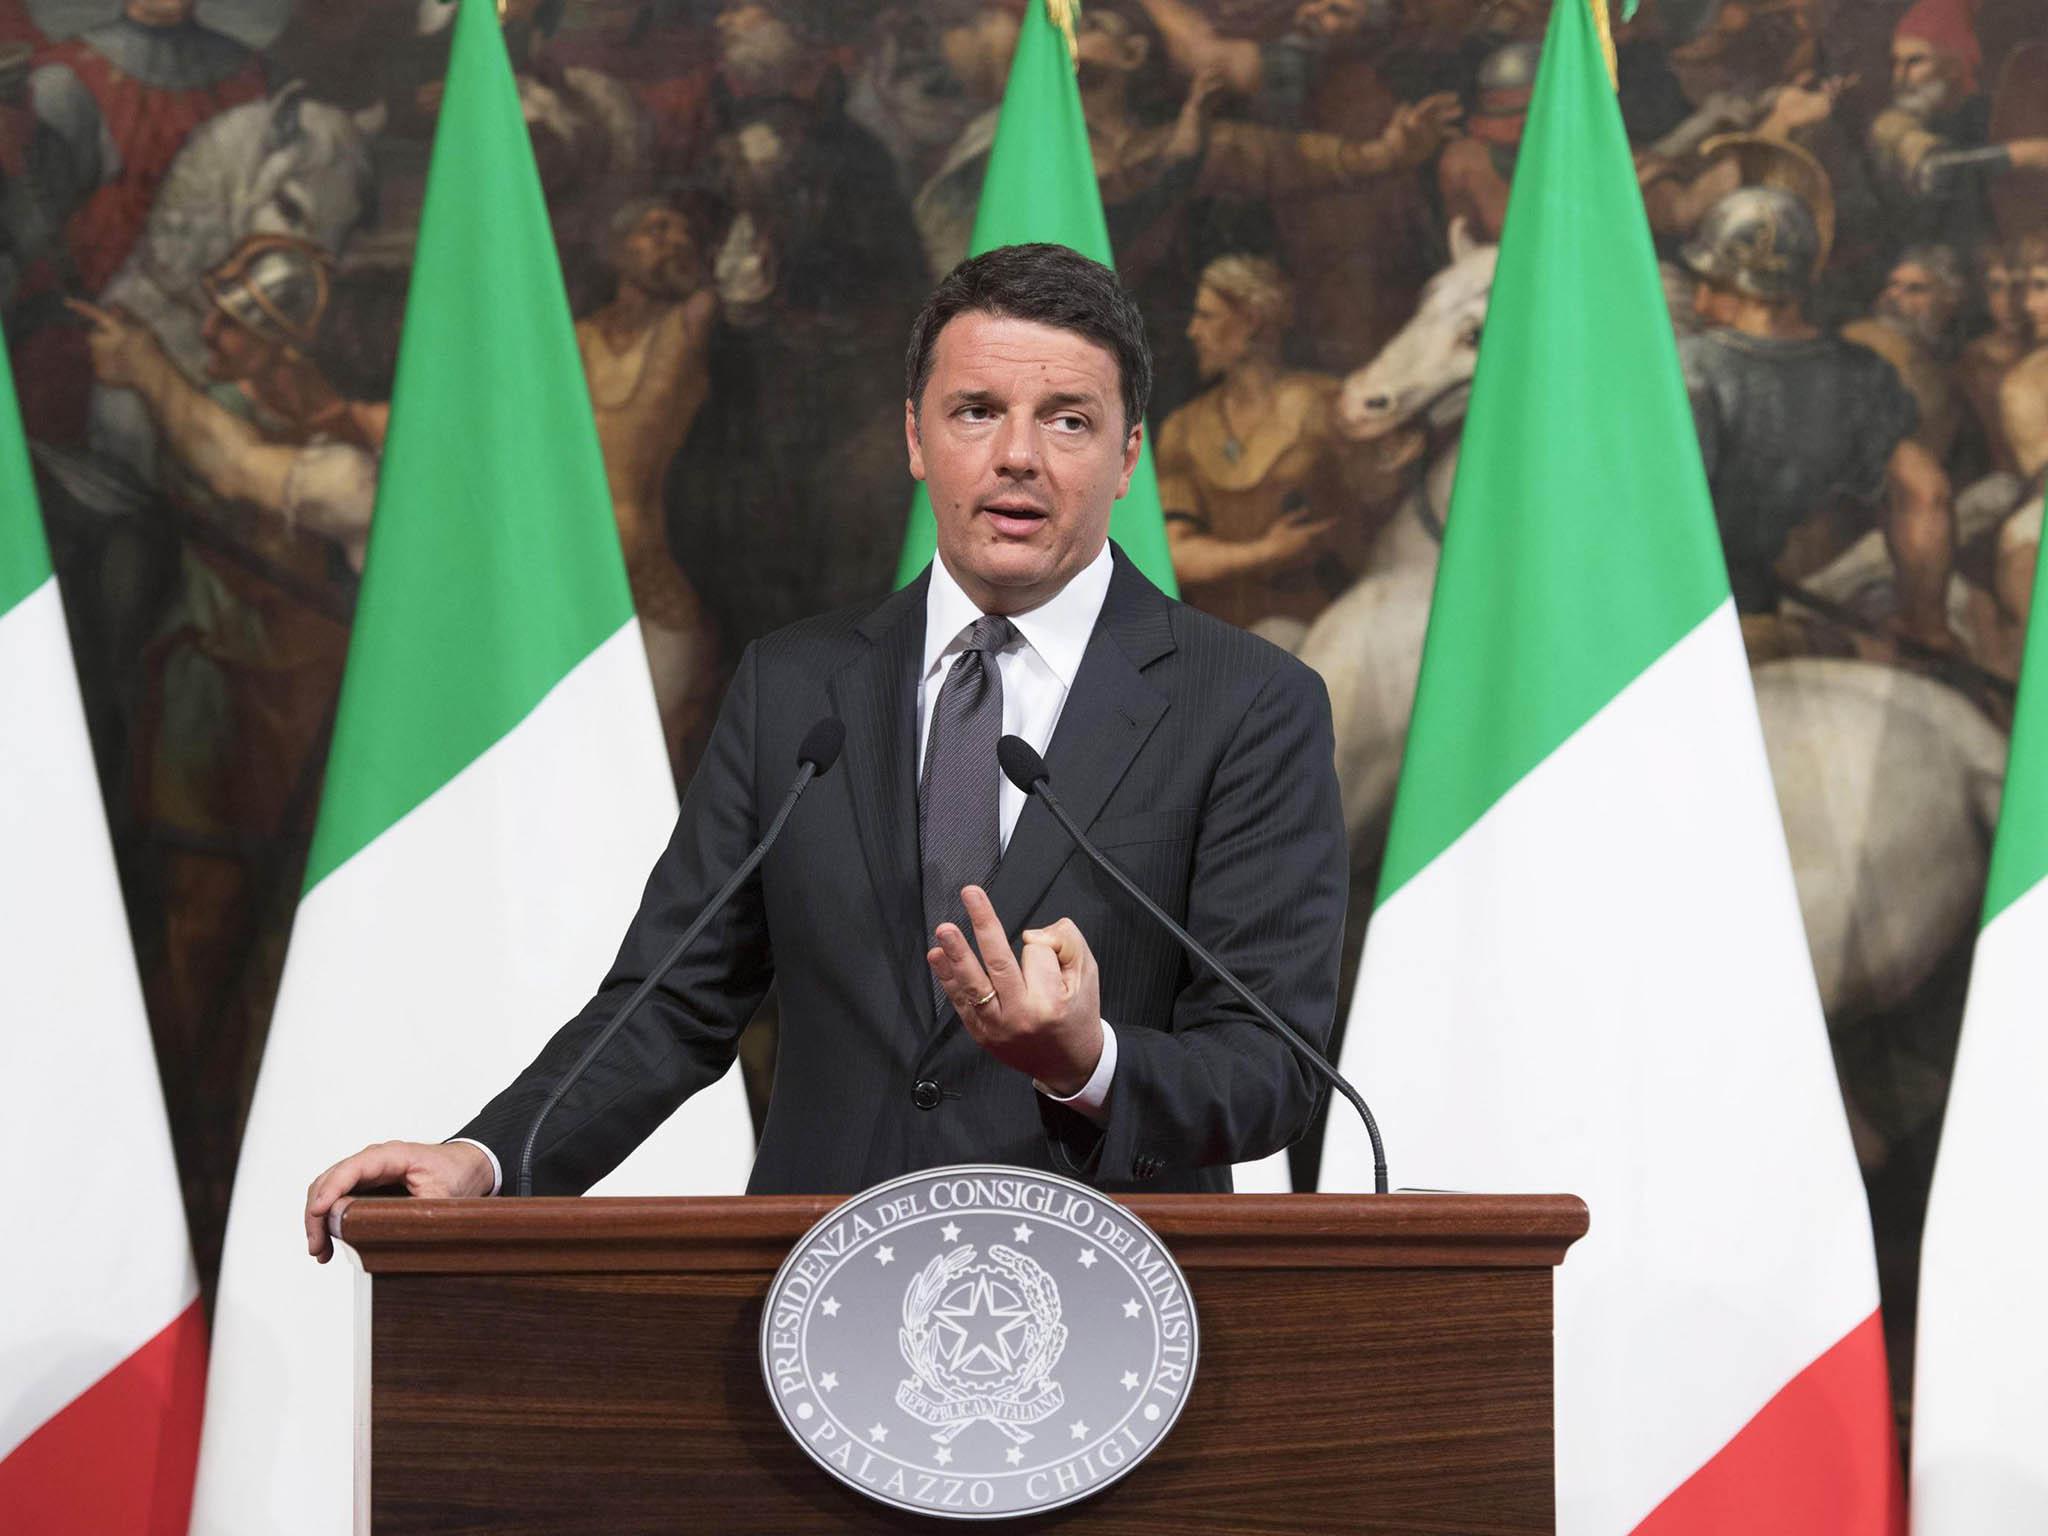 Renzi speaking during a press conference following the strong earthquake in central Italy, Rome,